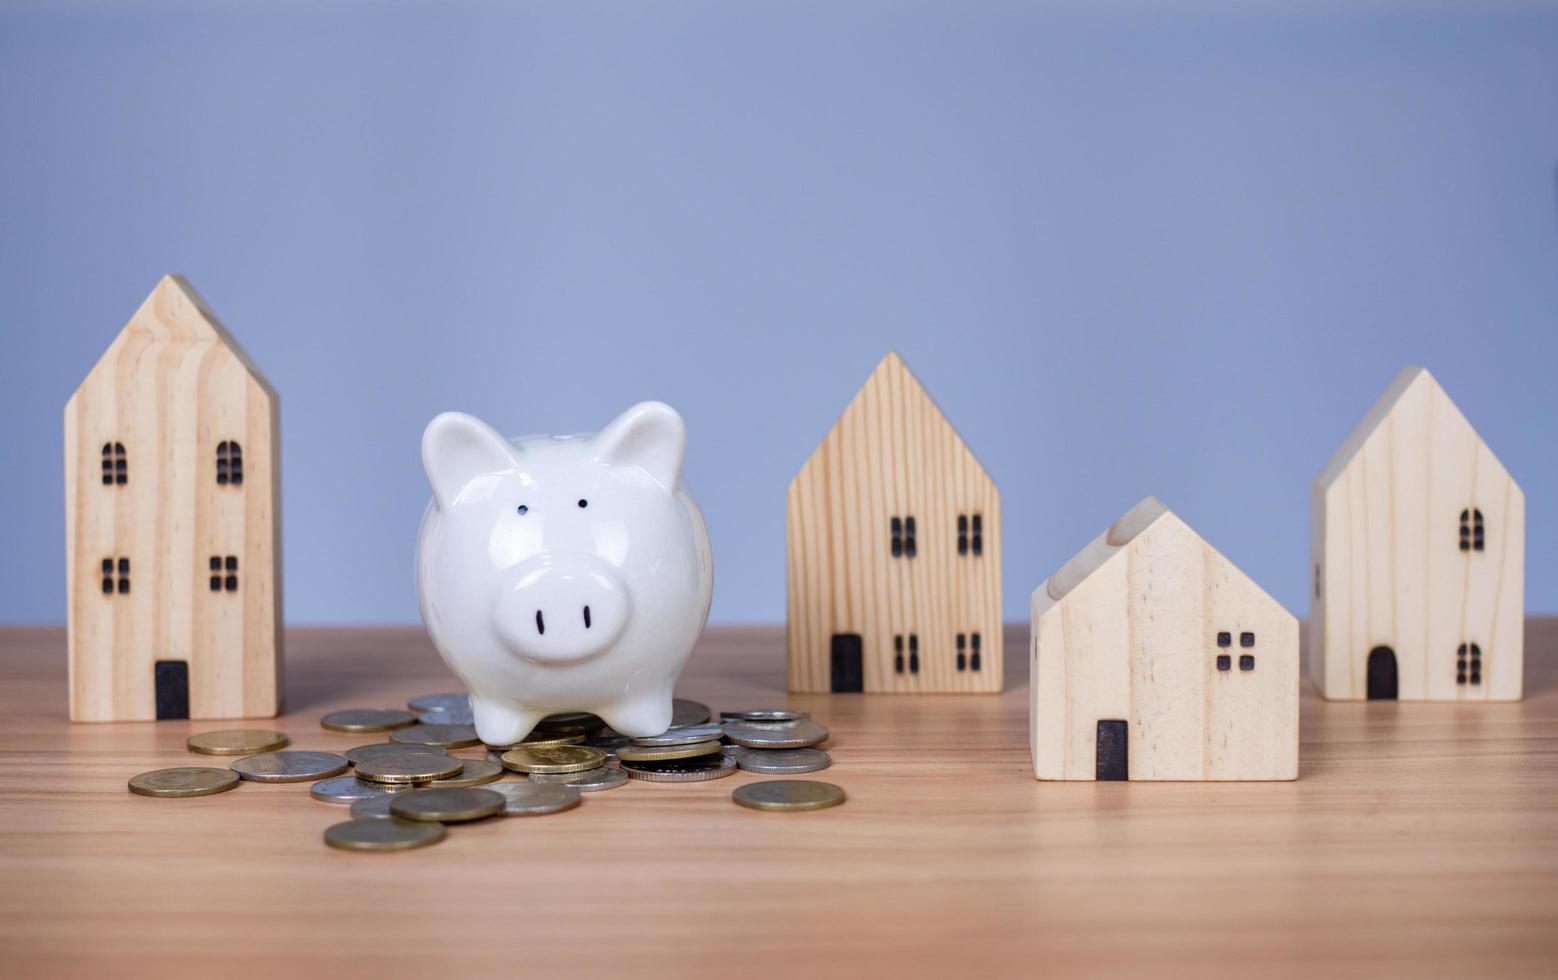 A white piggy bank is placed on a pile of coins. And beside it is a wooden model house on a white background. which are all on a wooden table photo